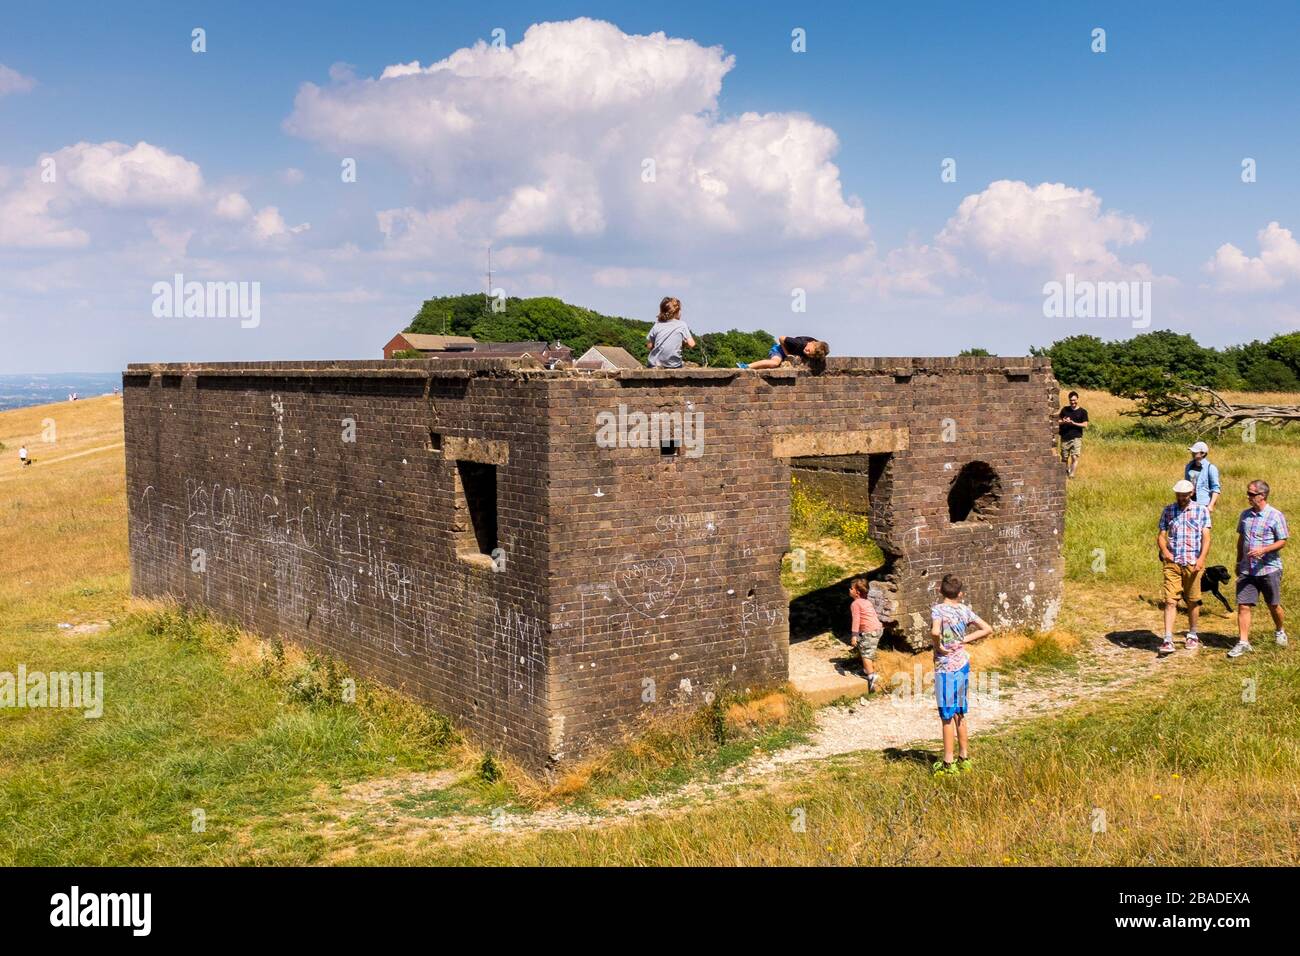 Children Play On An Old Concrete Structure Near Devils Dyke, East Sussex Just Outside Of Brighton, England Stock Photo